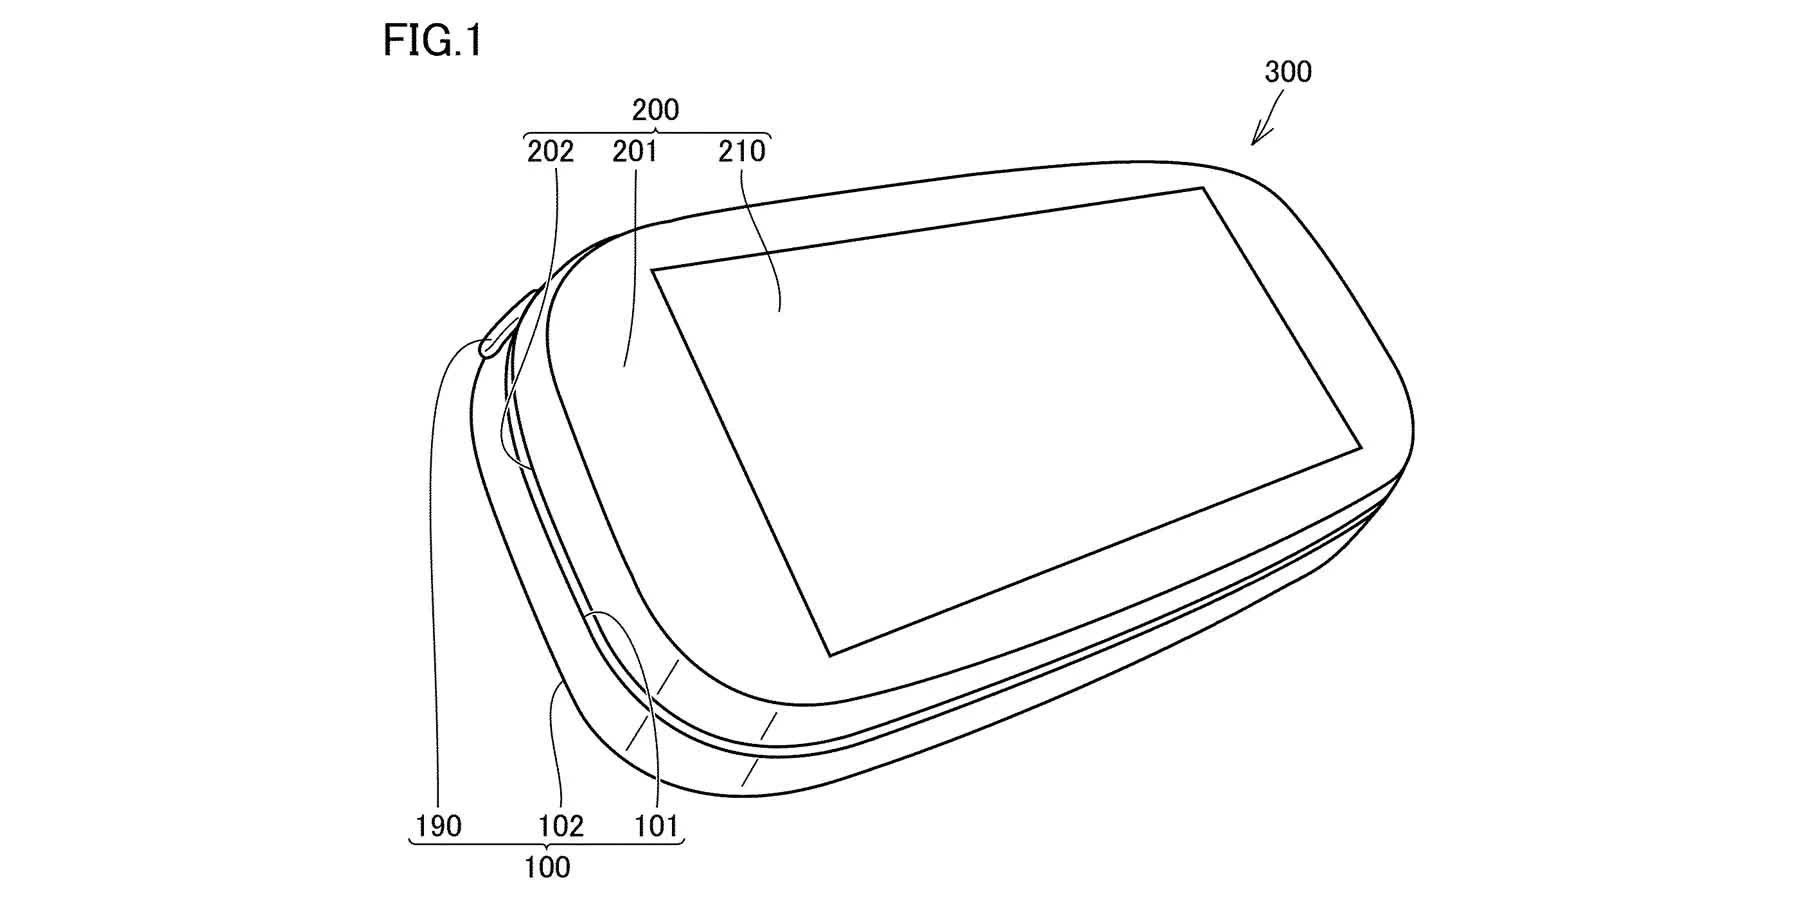 Nintendo Files A Patent For A Dual-Screen Gaming Console, Updates Social media Guidelines